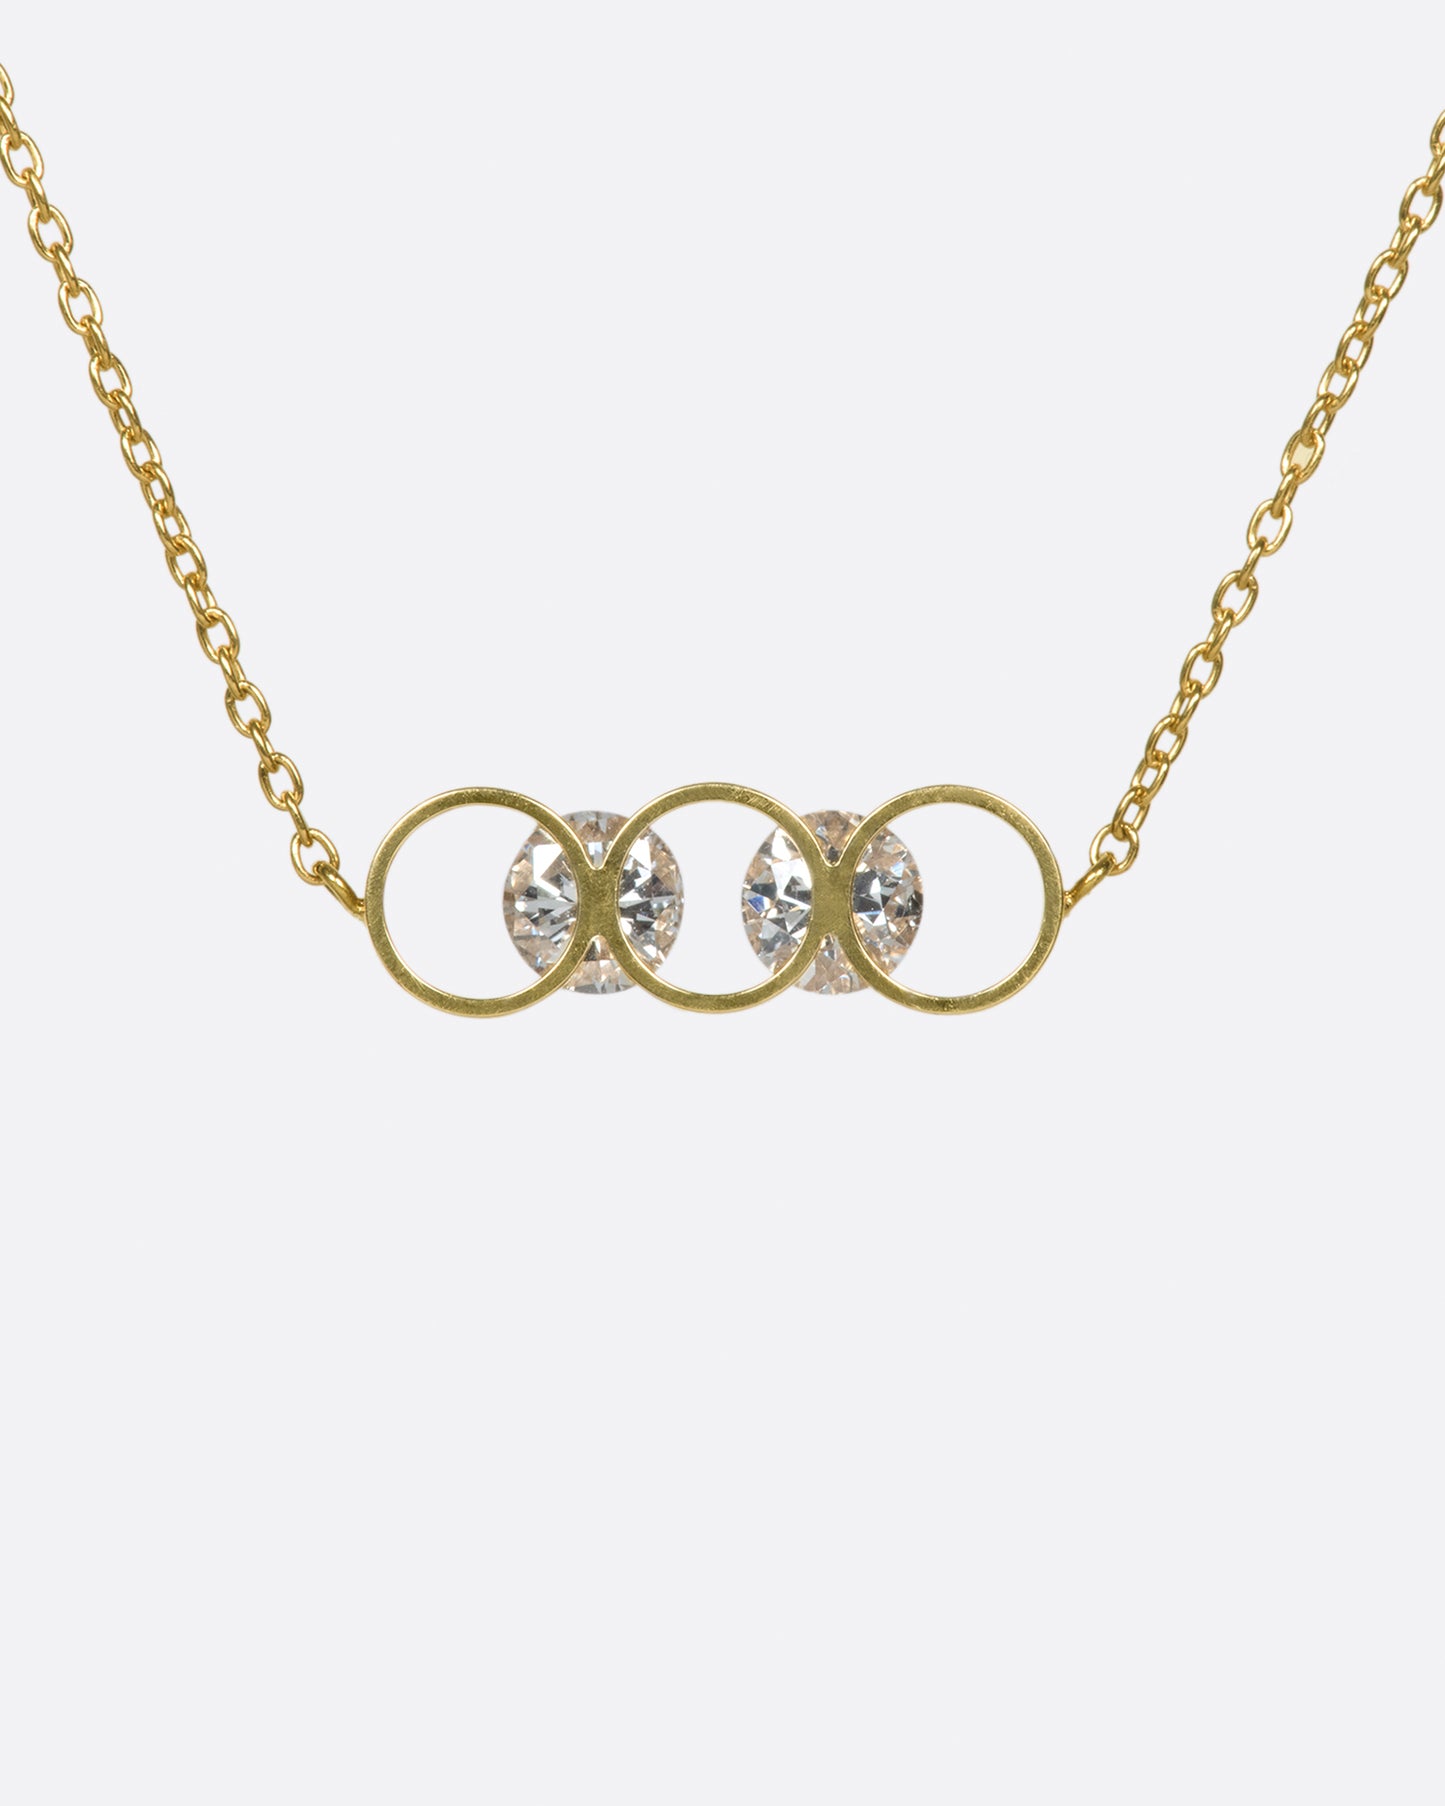 A gold bar of concentric circles and round diamonds